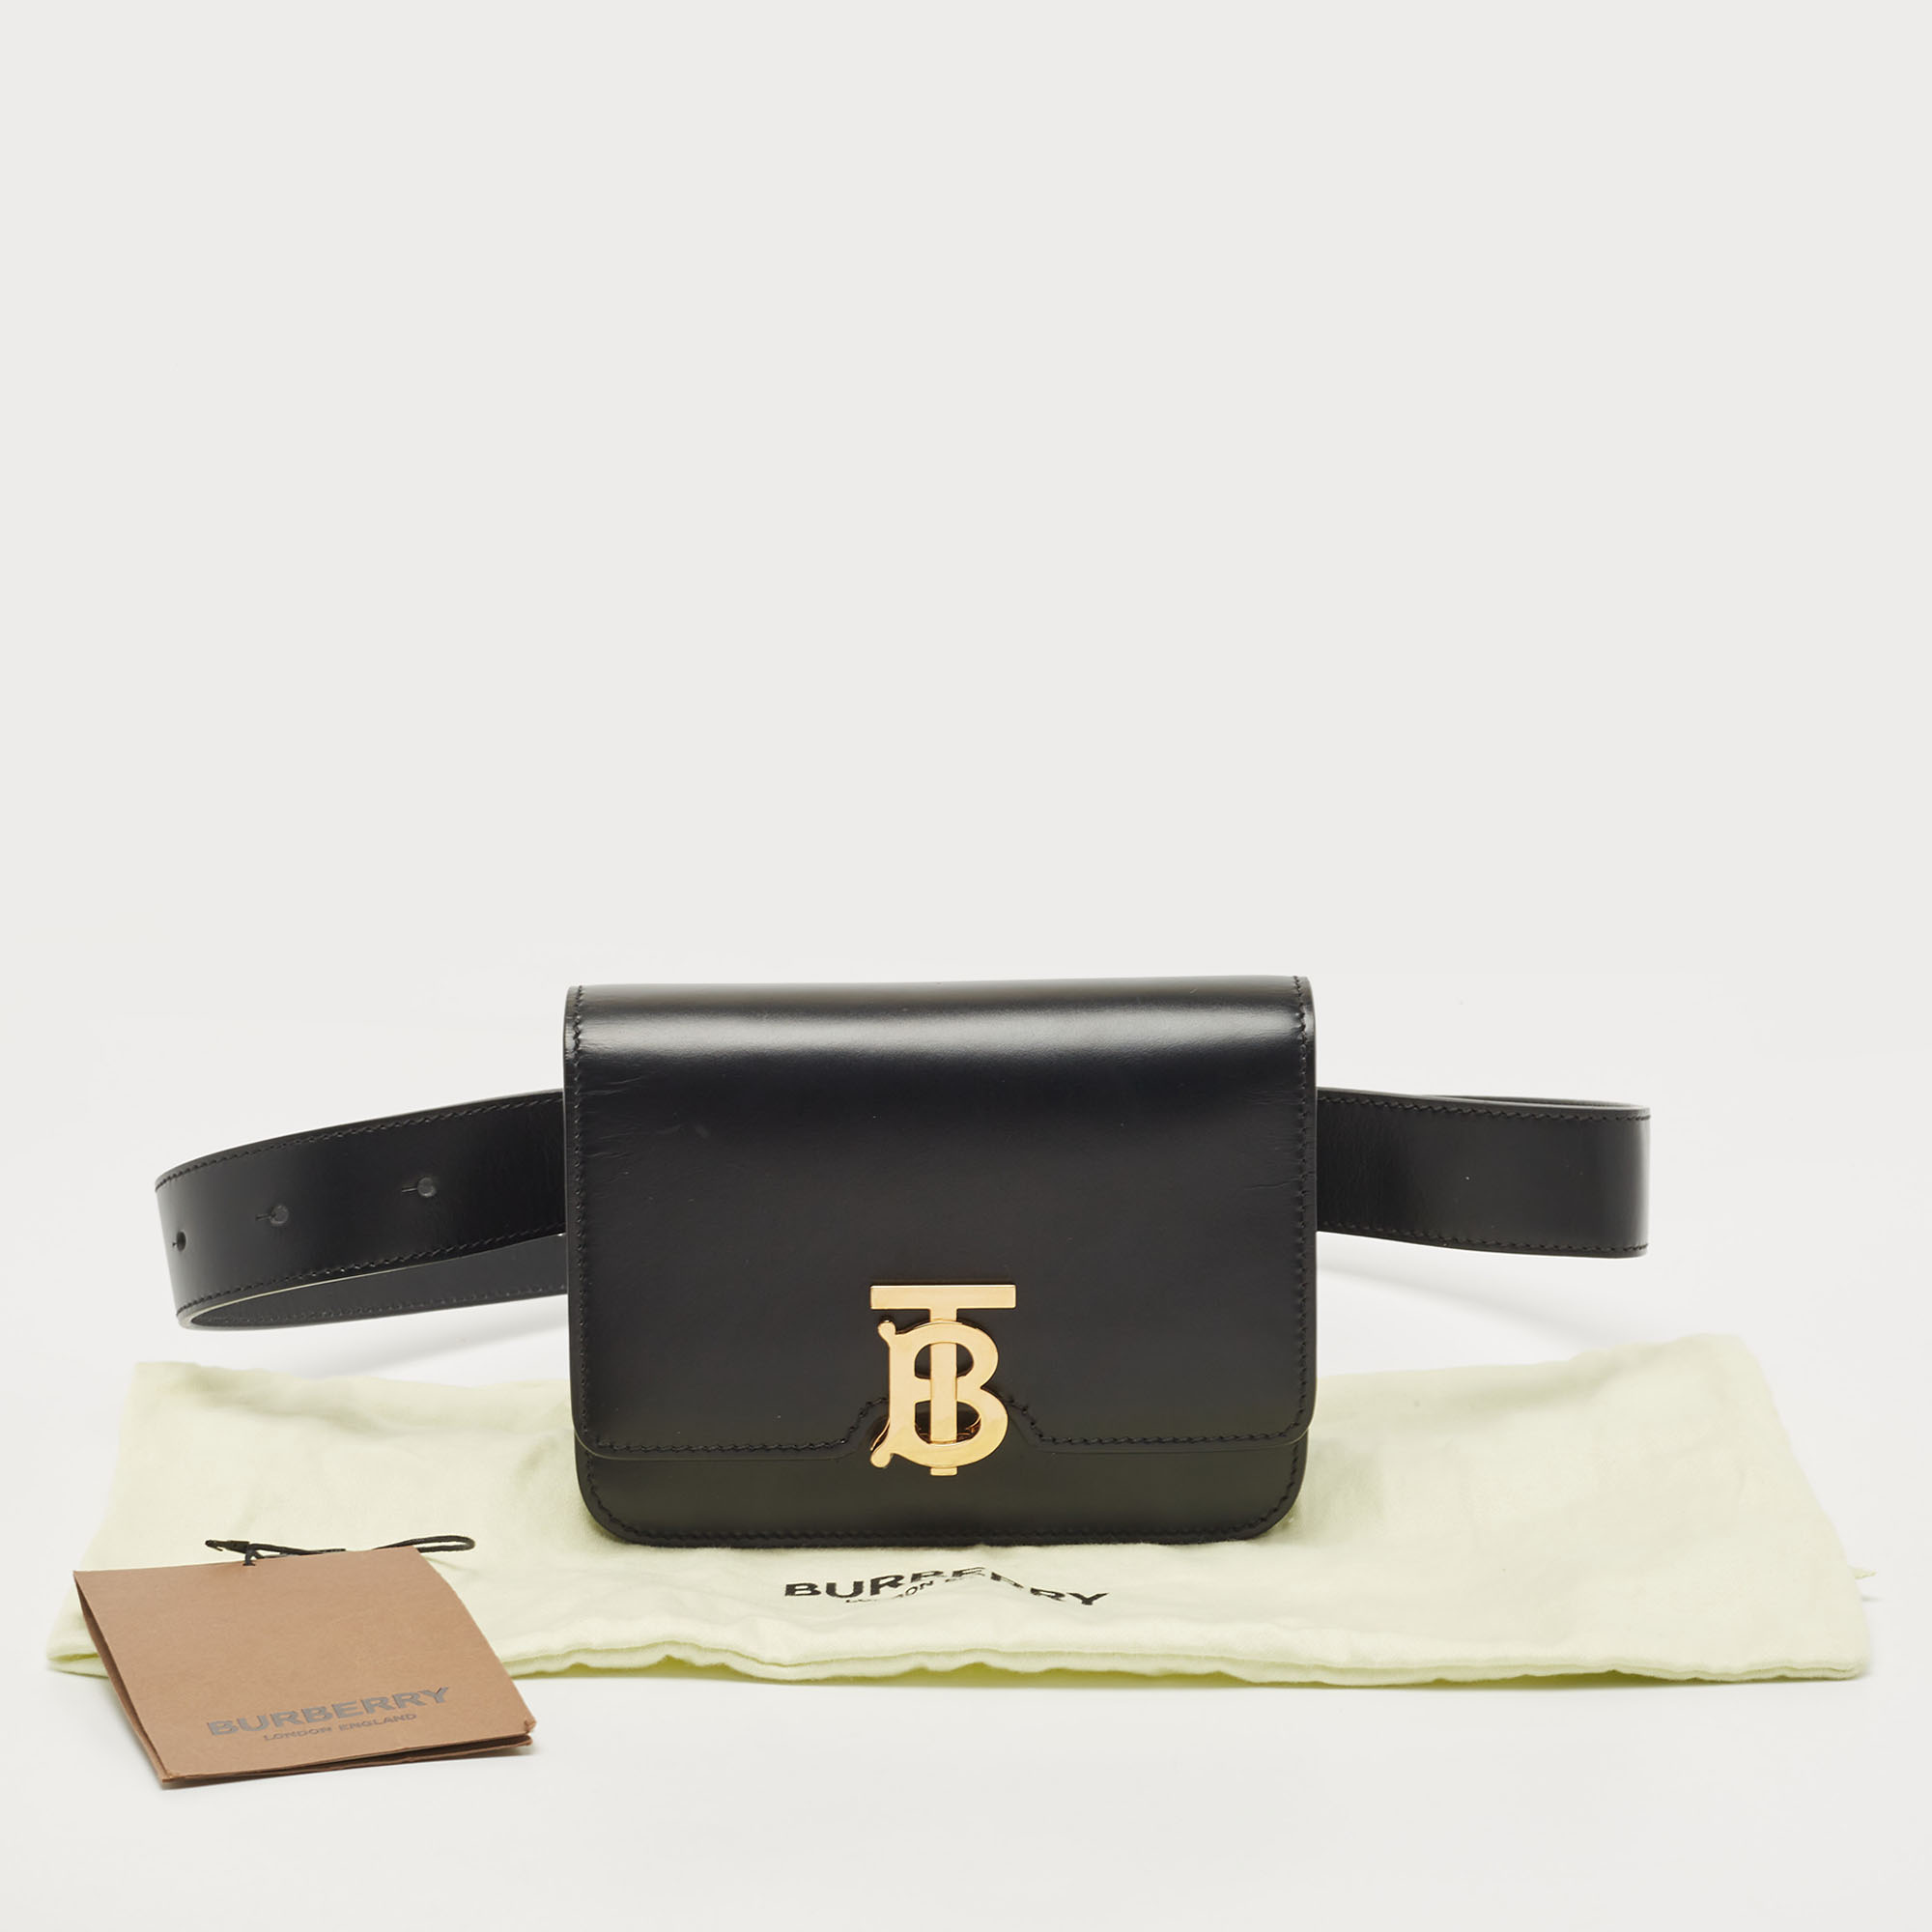 Burberry 100% Calf Leather Green TB Belt Bag One Size - 70% off